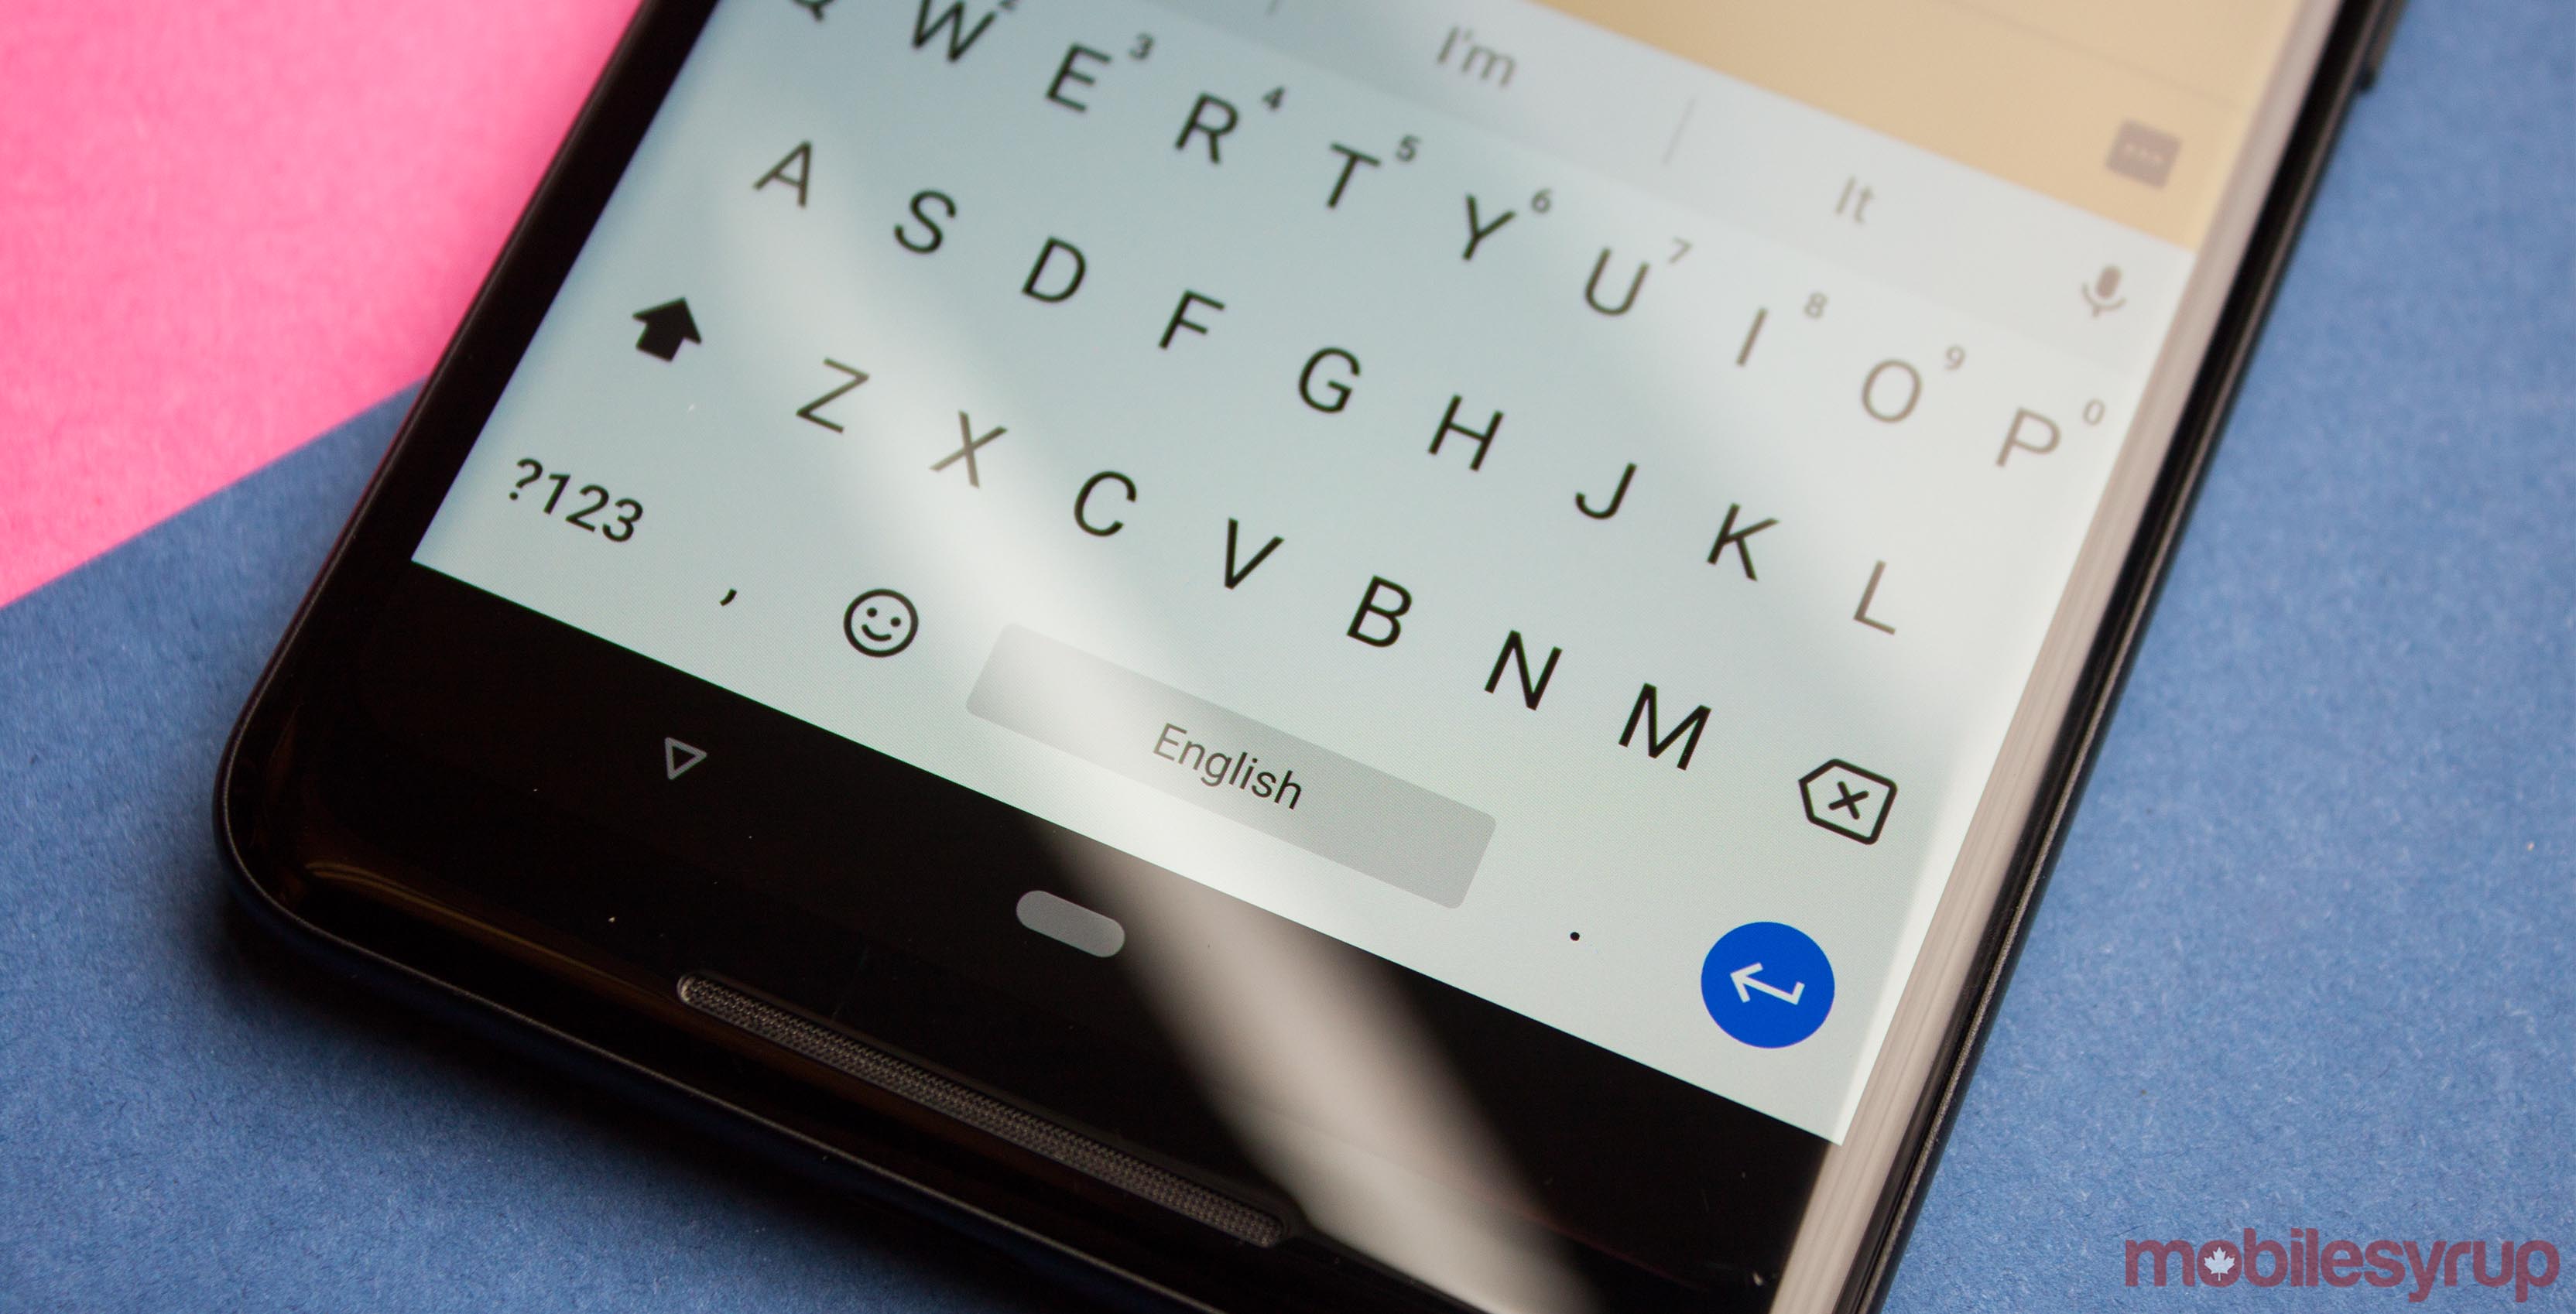 Gboard keyboard on Android